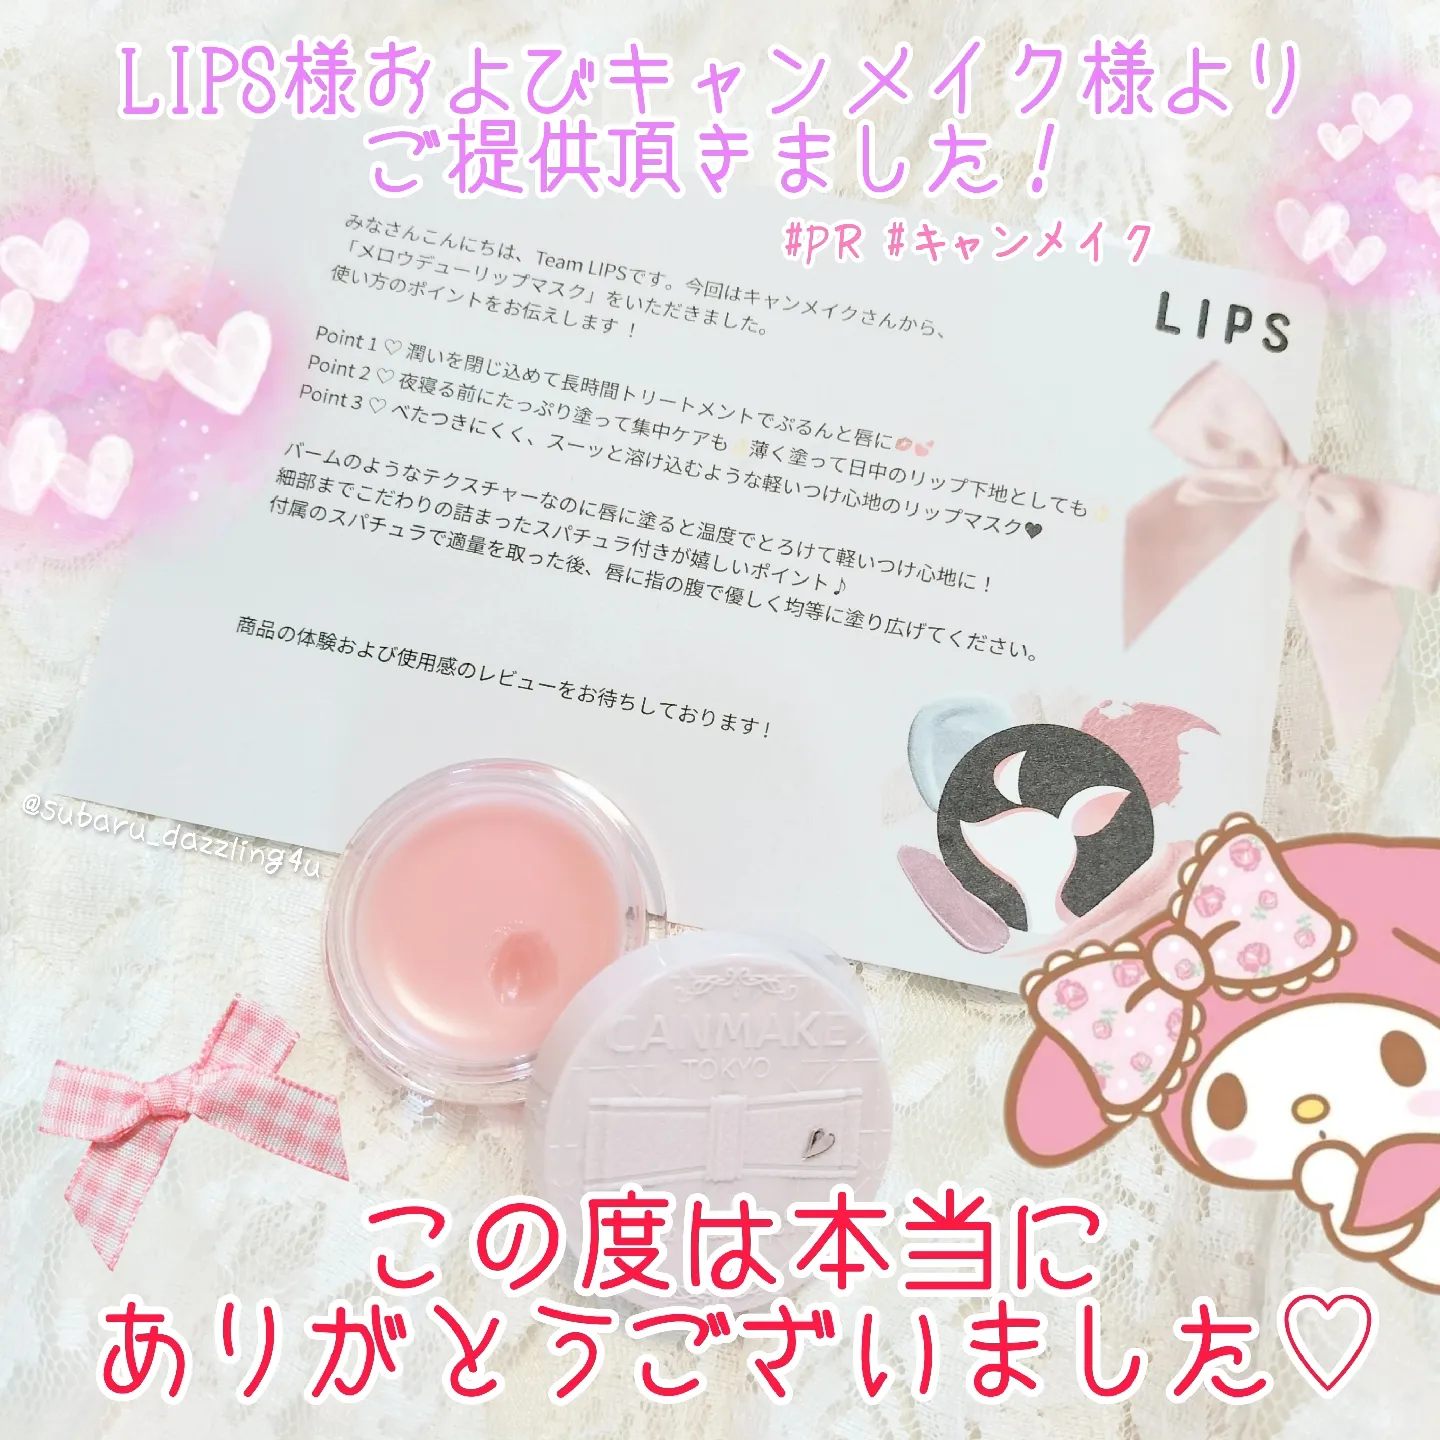 CANMAKE Mellow Dew Lip Mask 】 The new lip mask is super cute